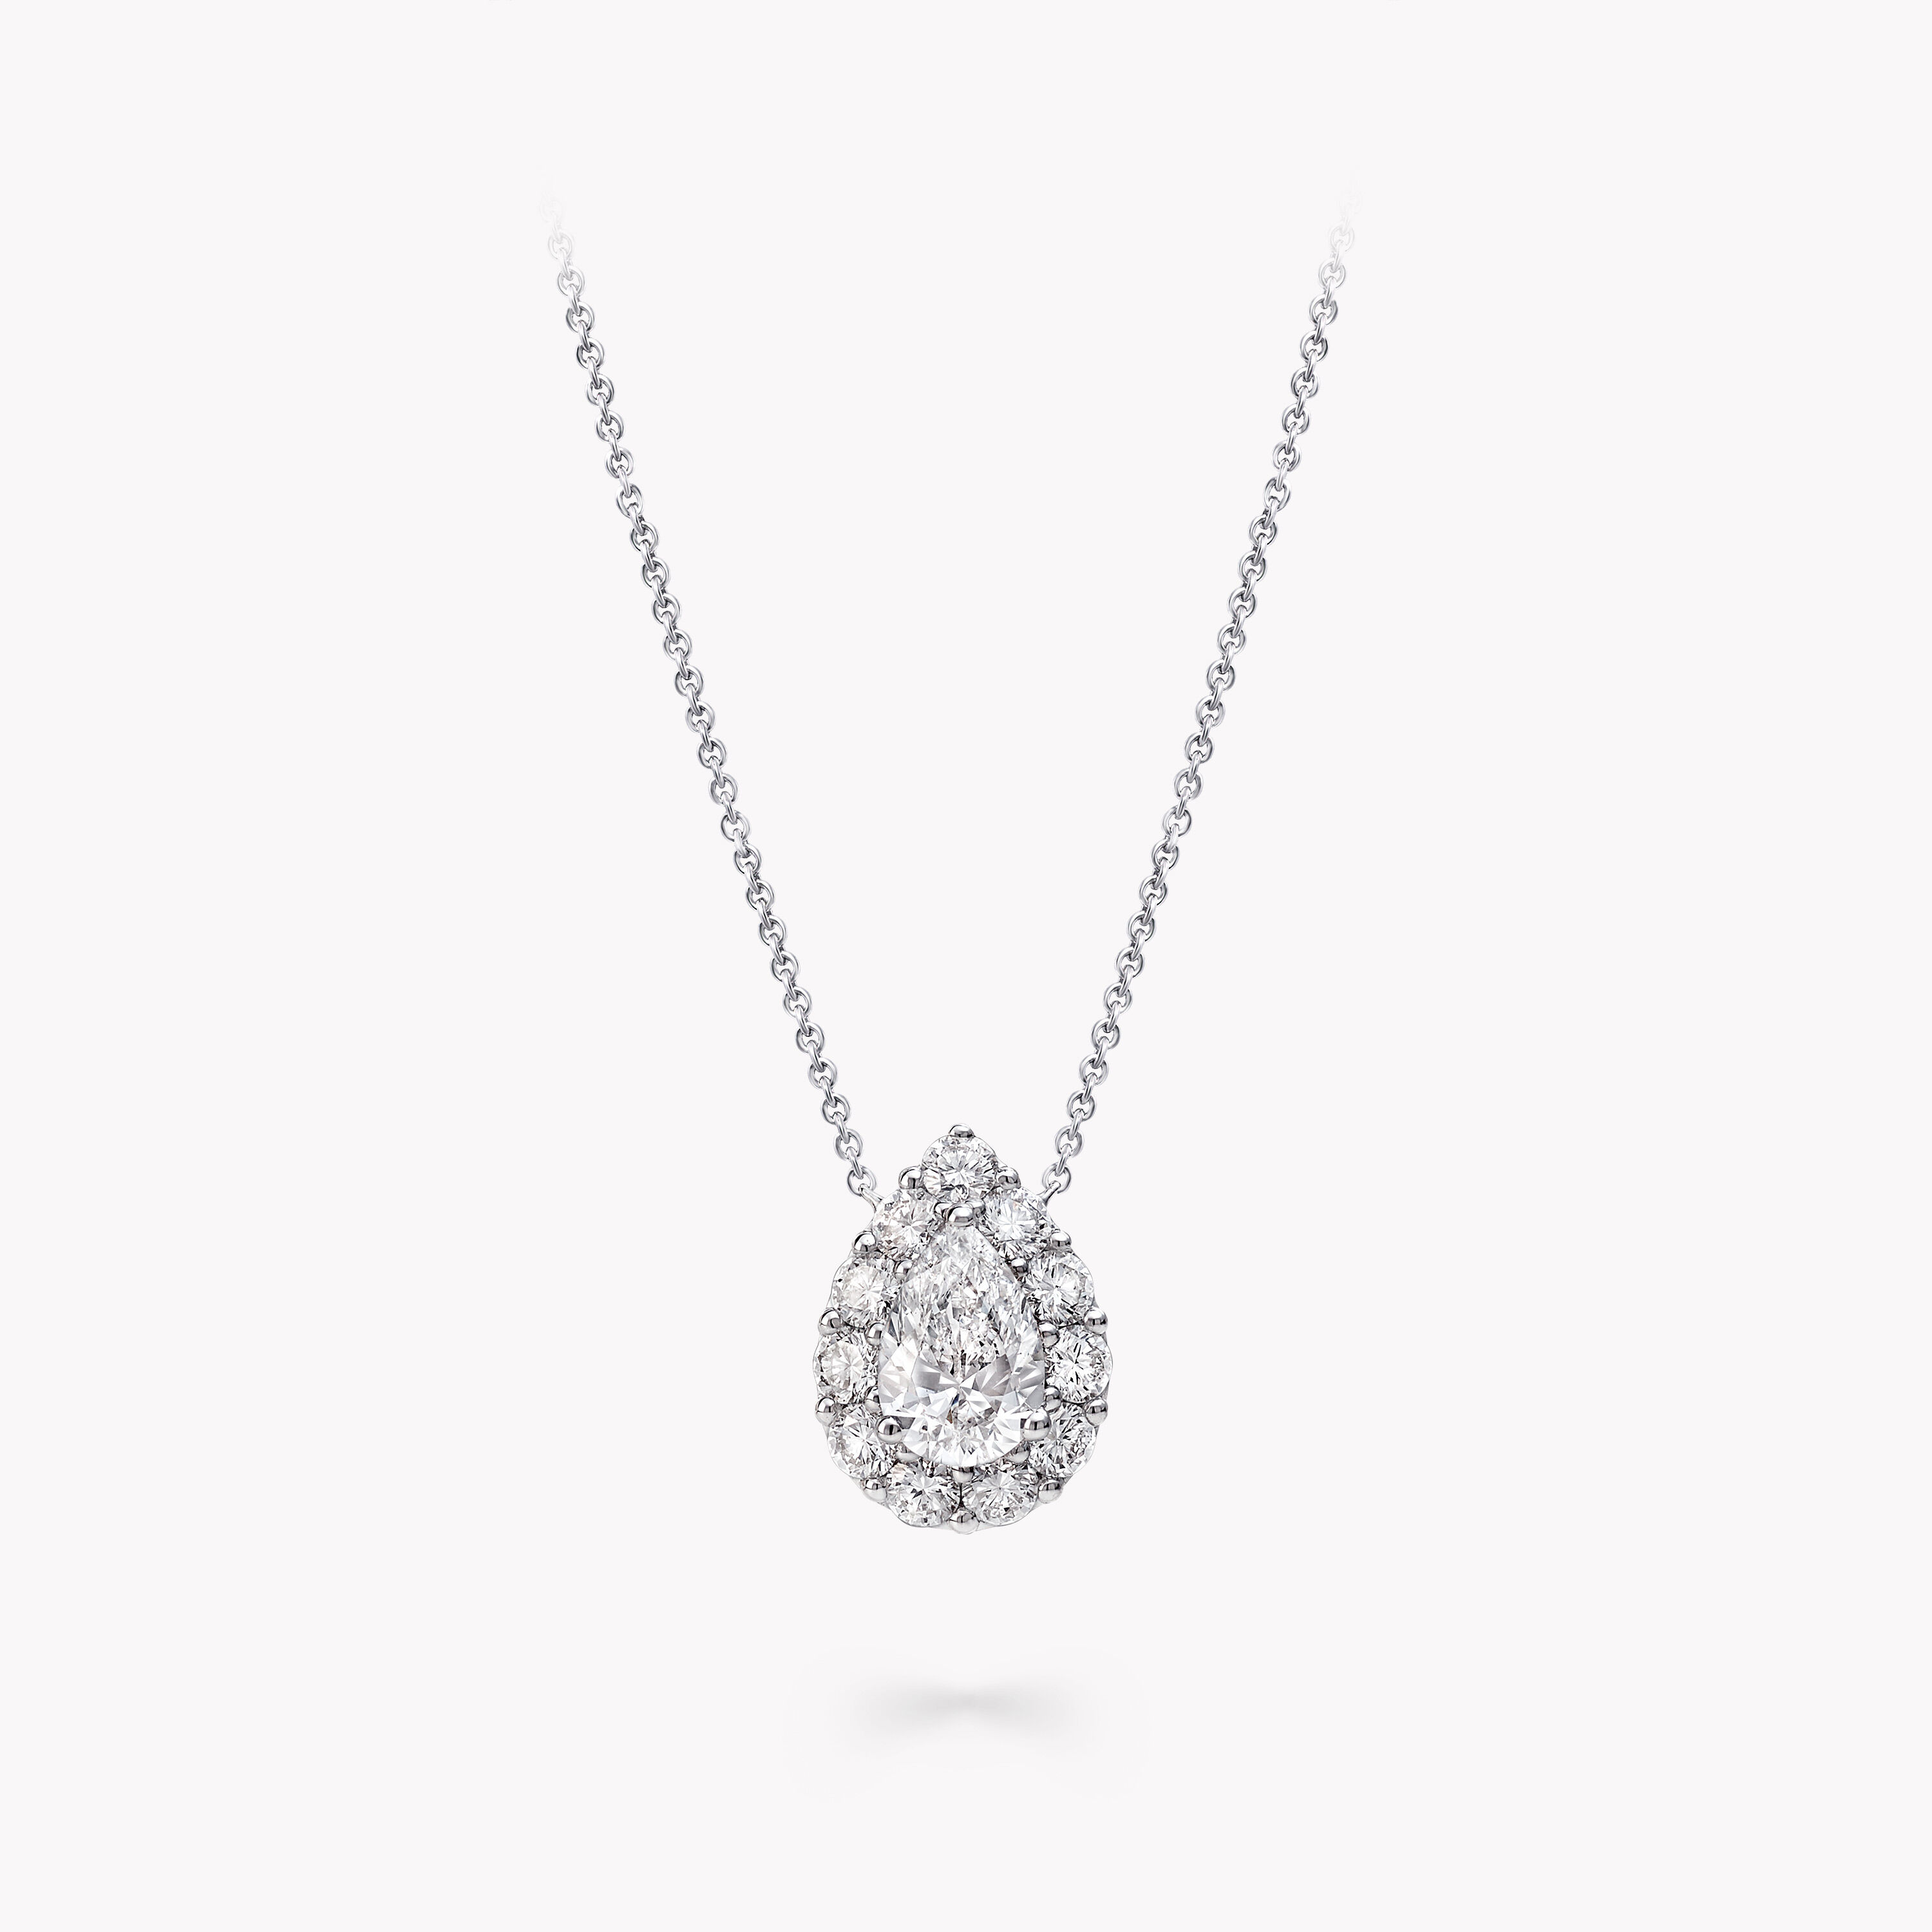 Graff White Gold And Diamond Icon Necklace Available For Immediate Sale At  Sotheby's